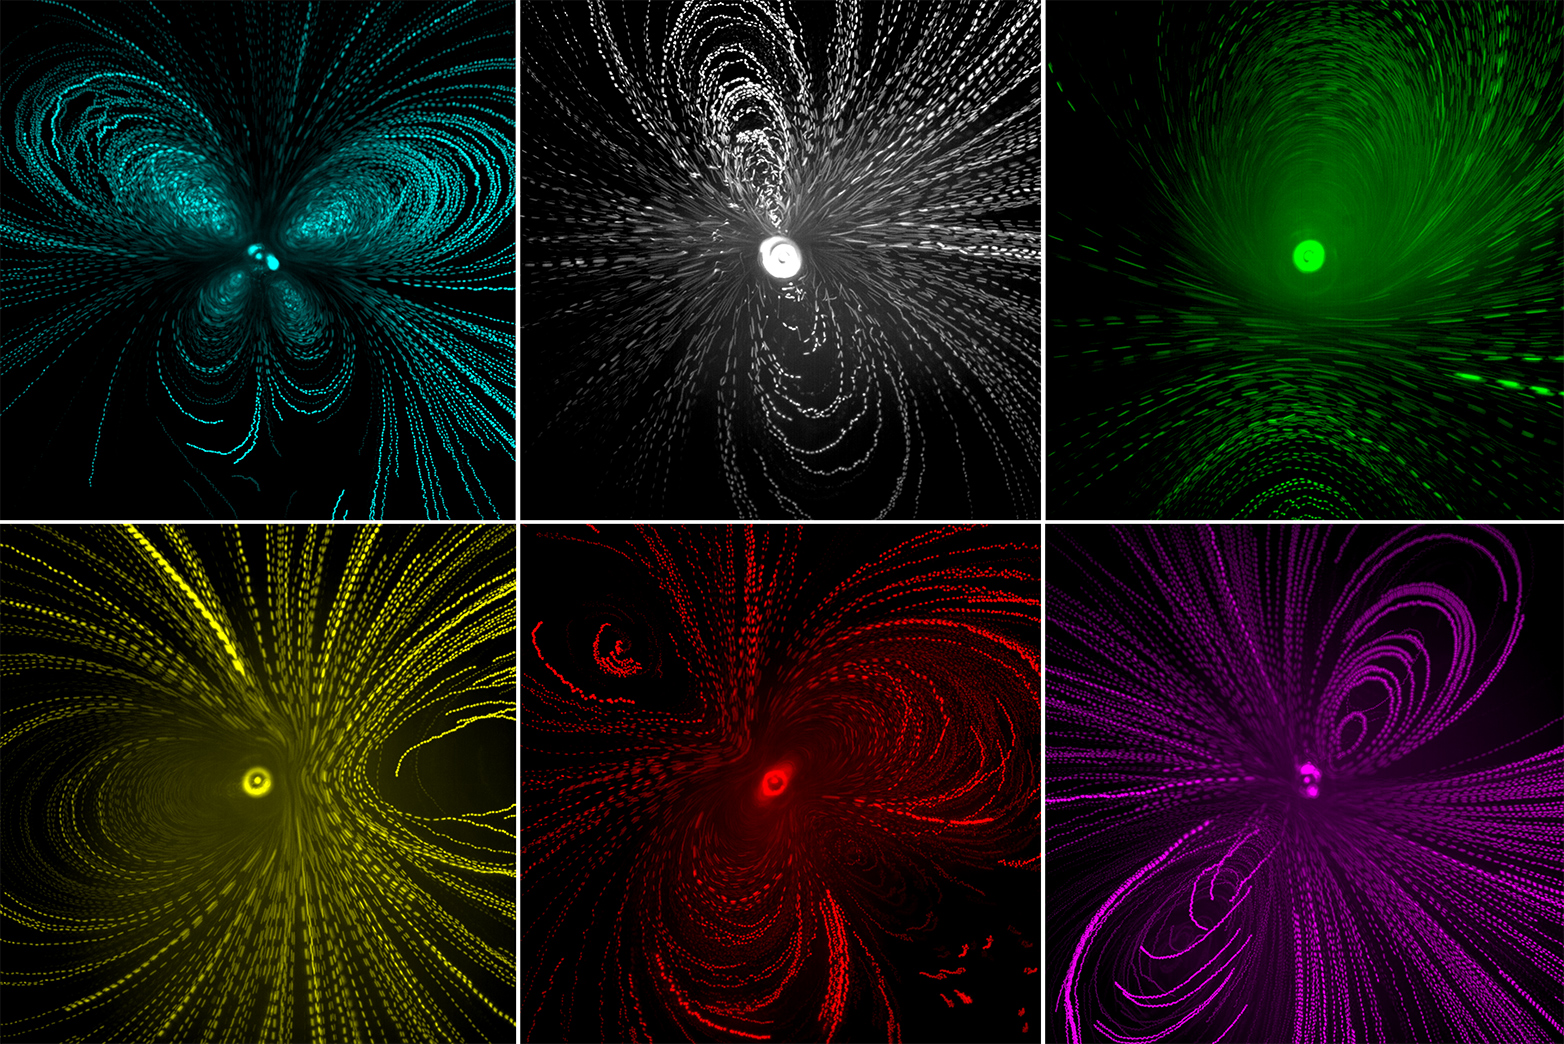 Six vortex patterns in different colors (top from left to right: blue, white, green; bottom from left to right: yellow, red, magenta).